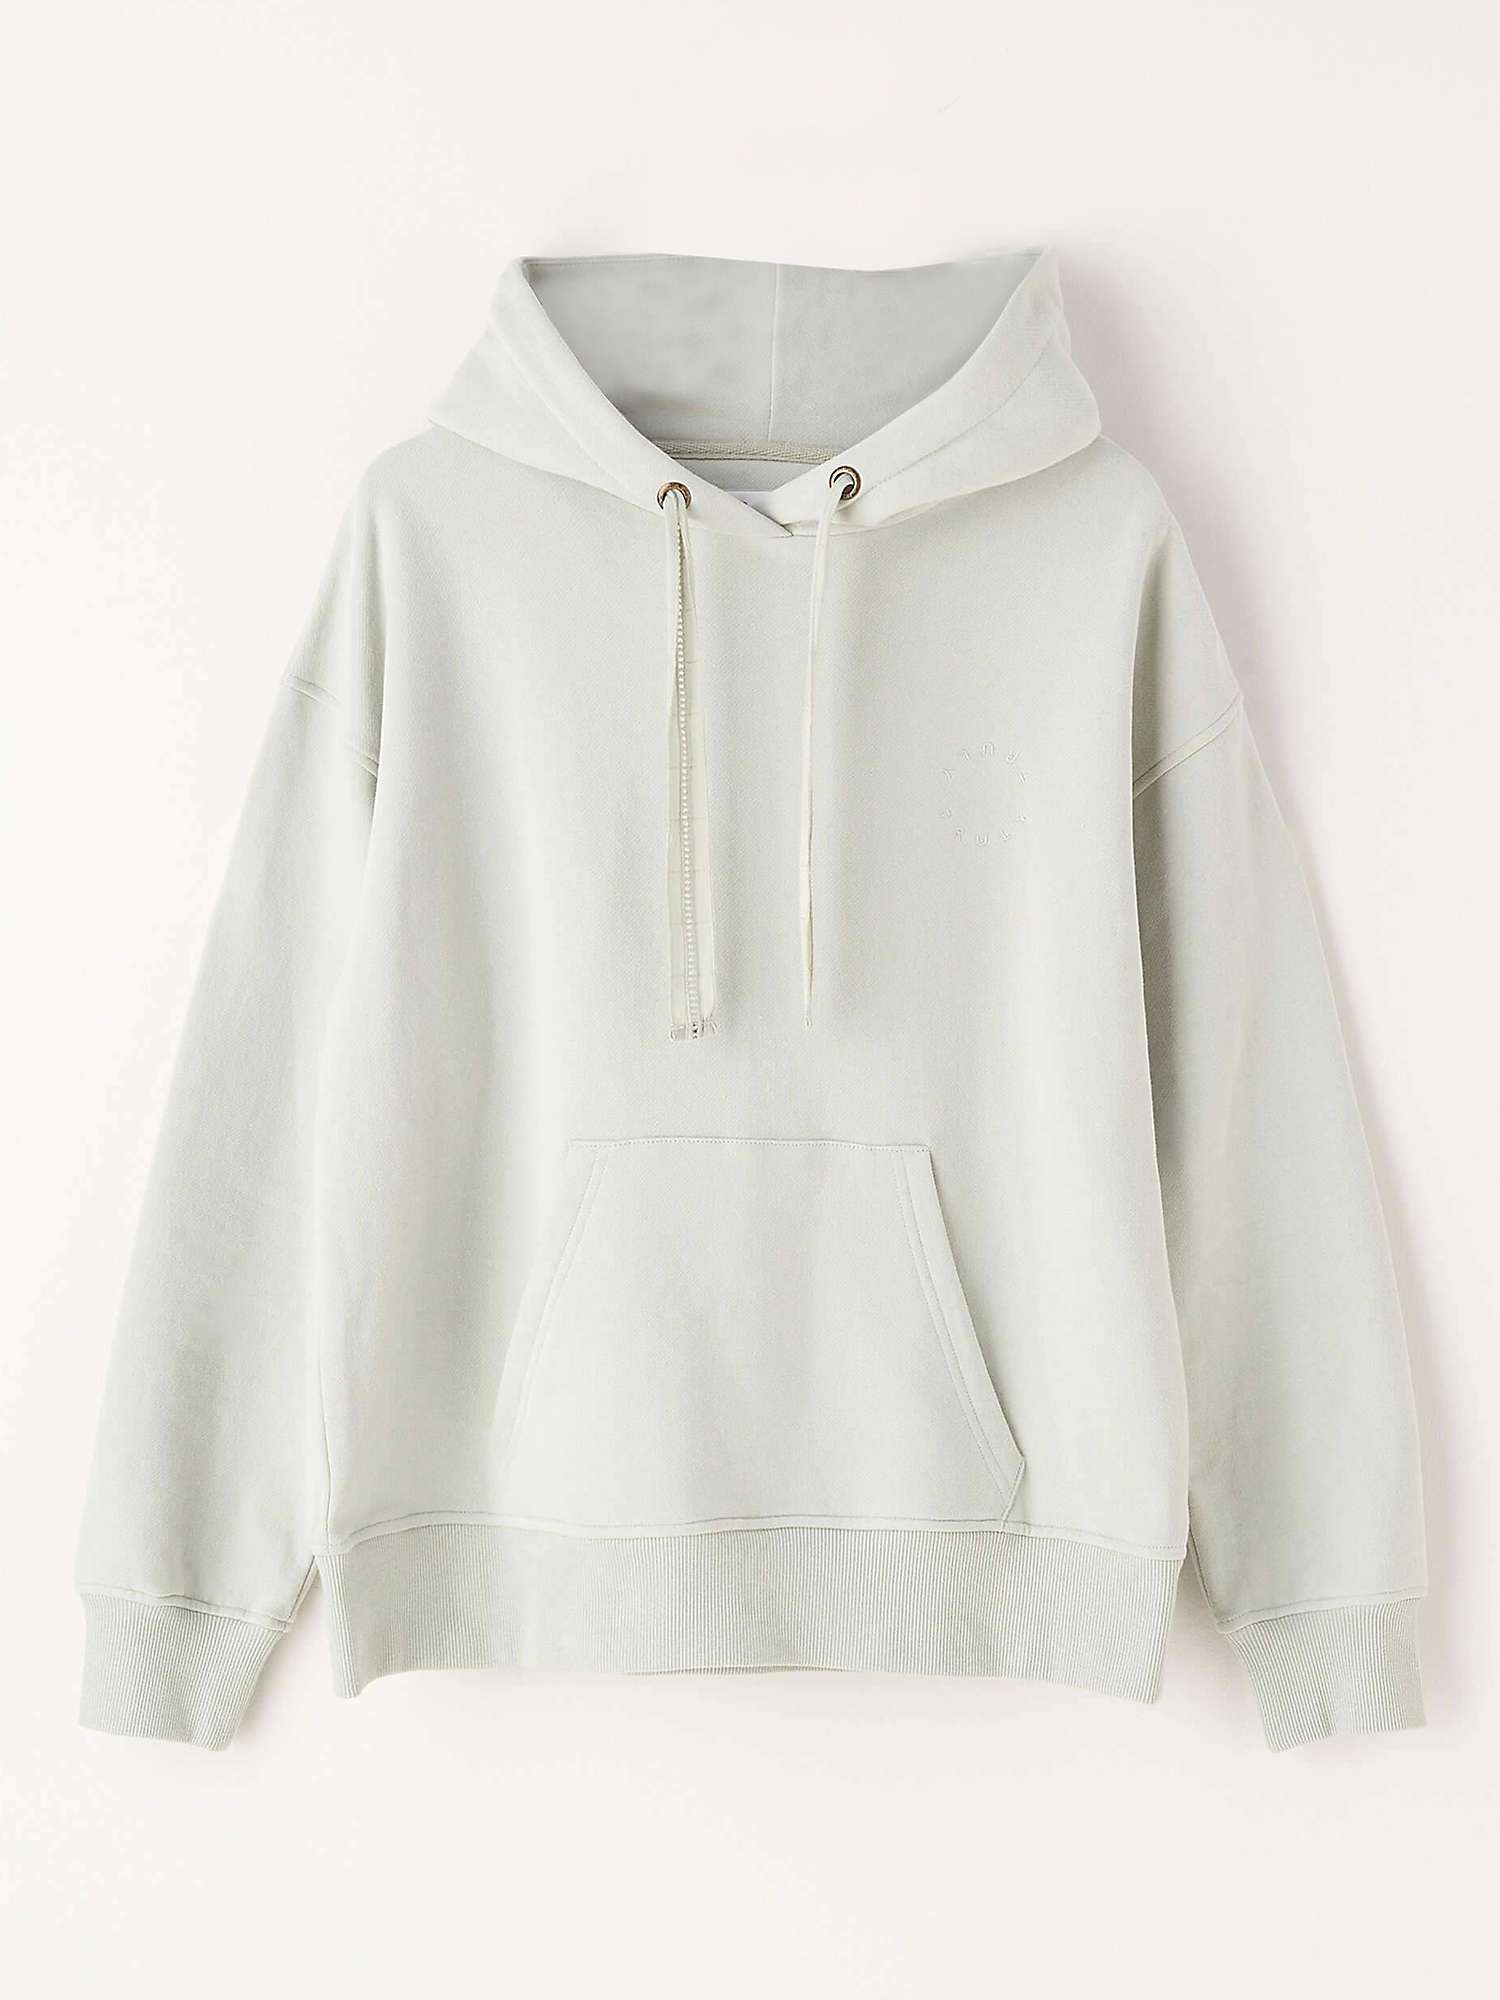 Buy Truly Henley Organic Cotton Hoodie Online at johnlewis.com